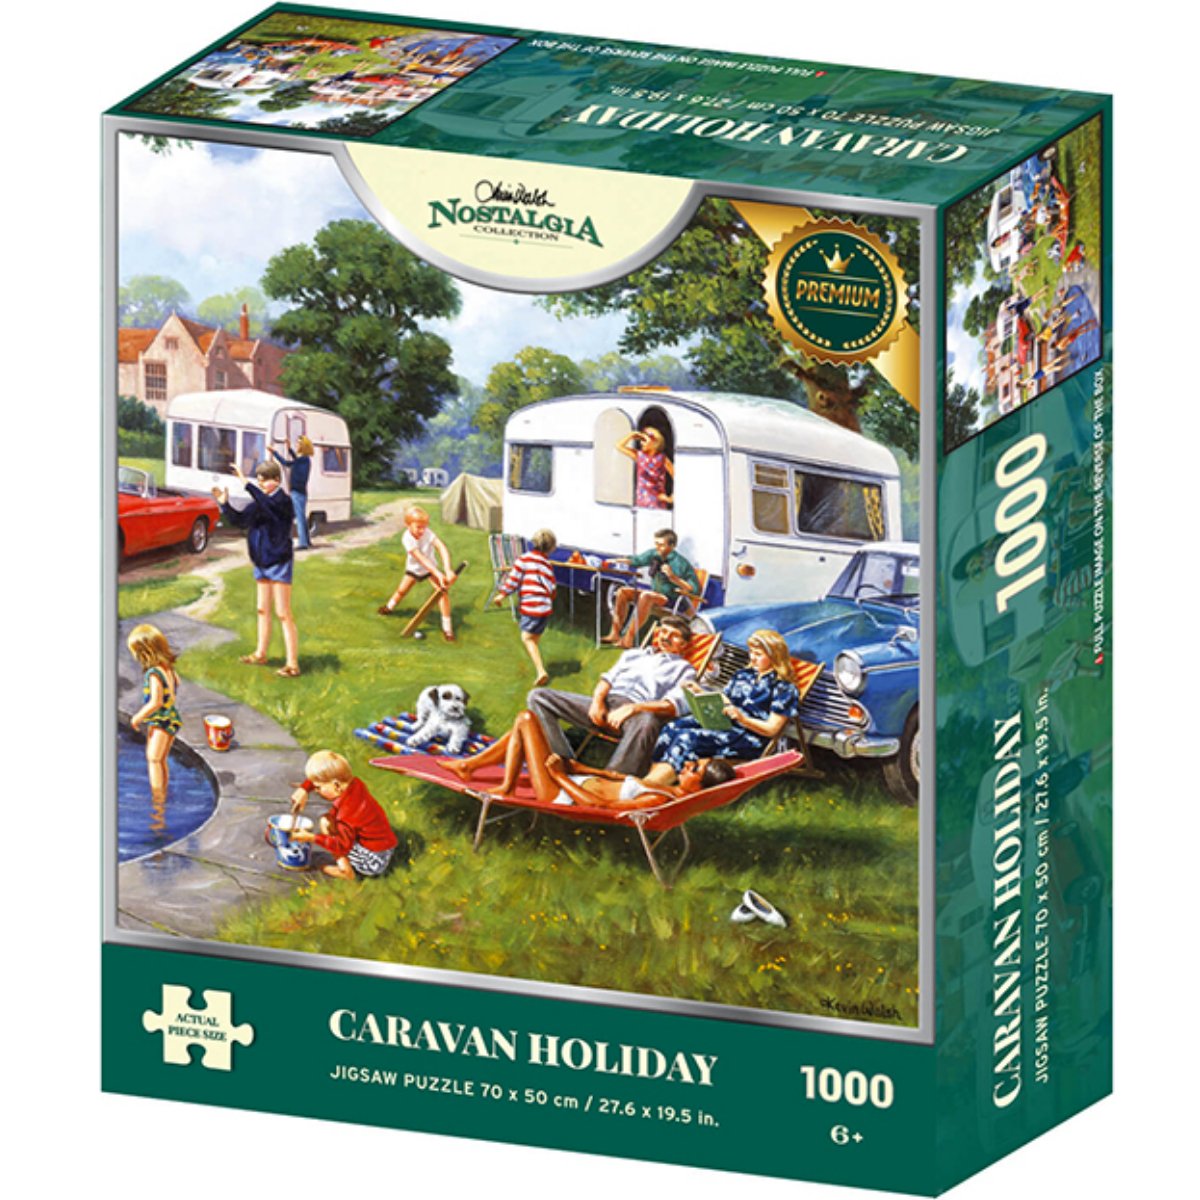 Kevin Walsh Nostalgia Caravan Holiday Jigsaw Puzzle (1000 Pieces)